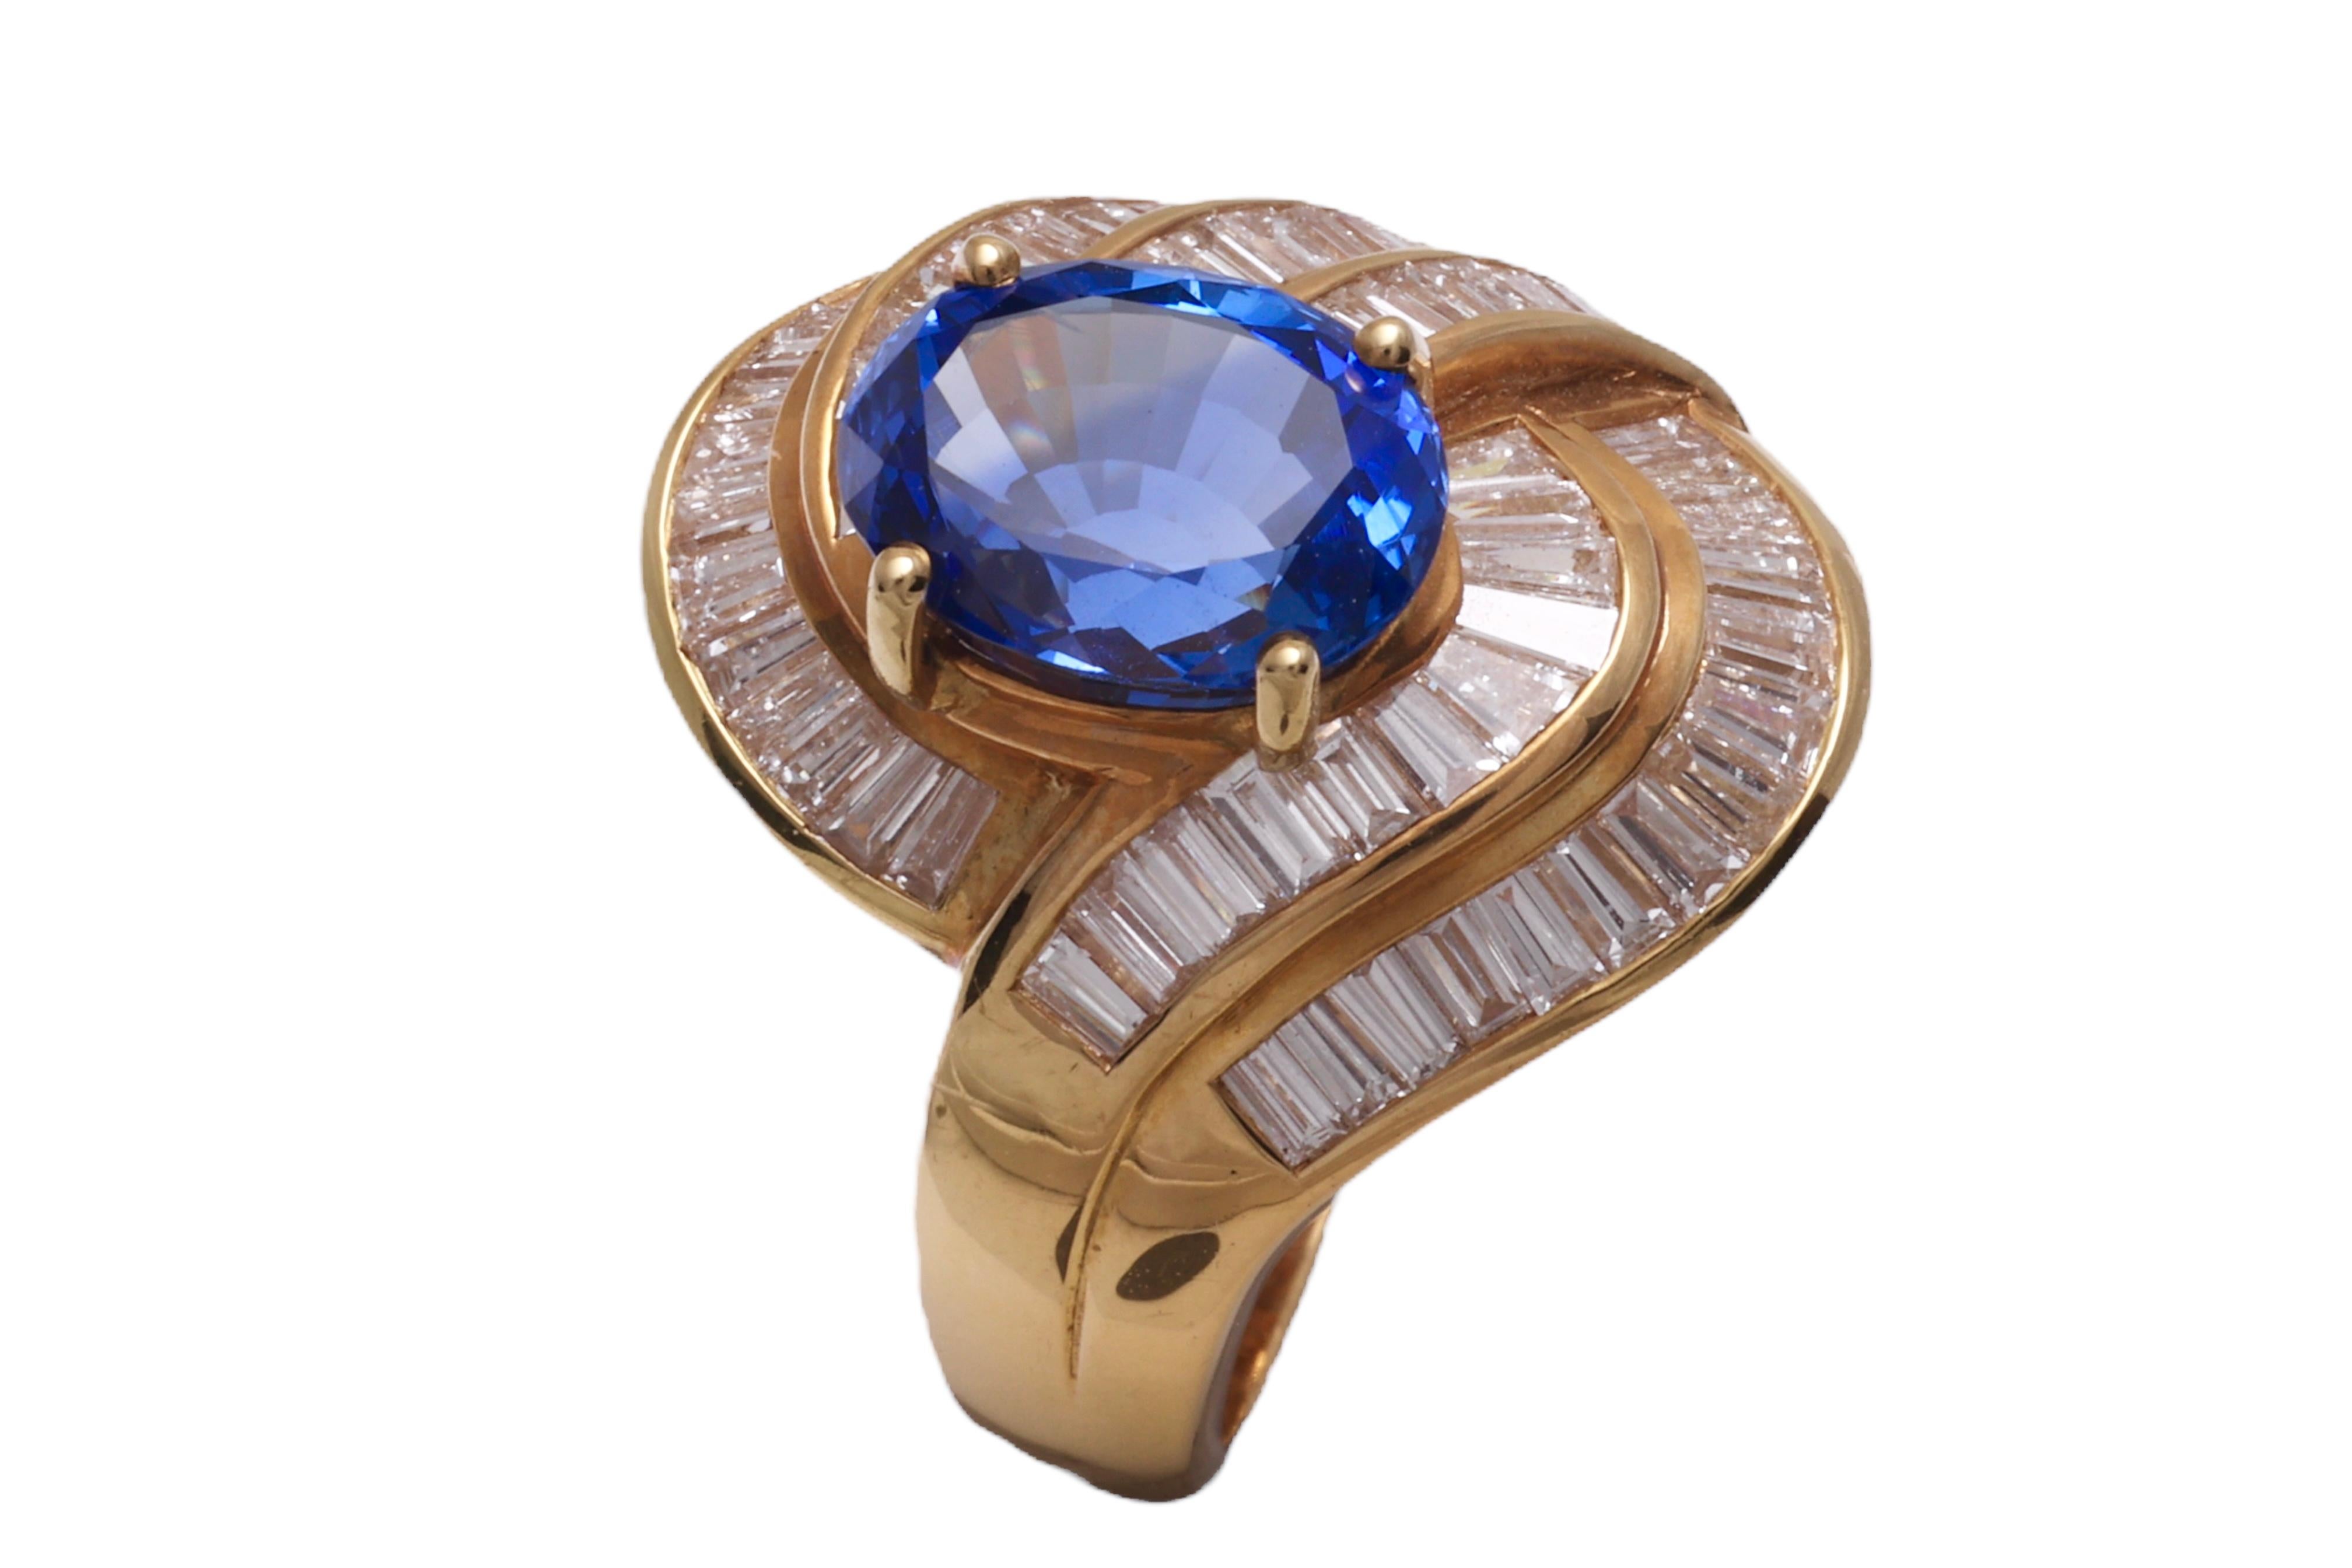  18 kt. Gold Ring With Ceylon Sapphire & Baguette Cut Diamonds For Sale 3